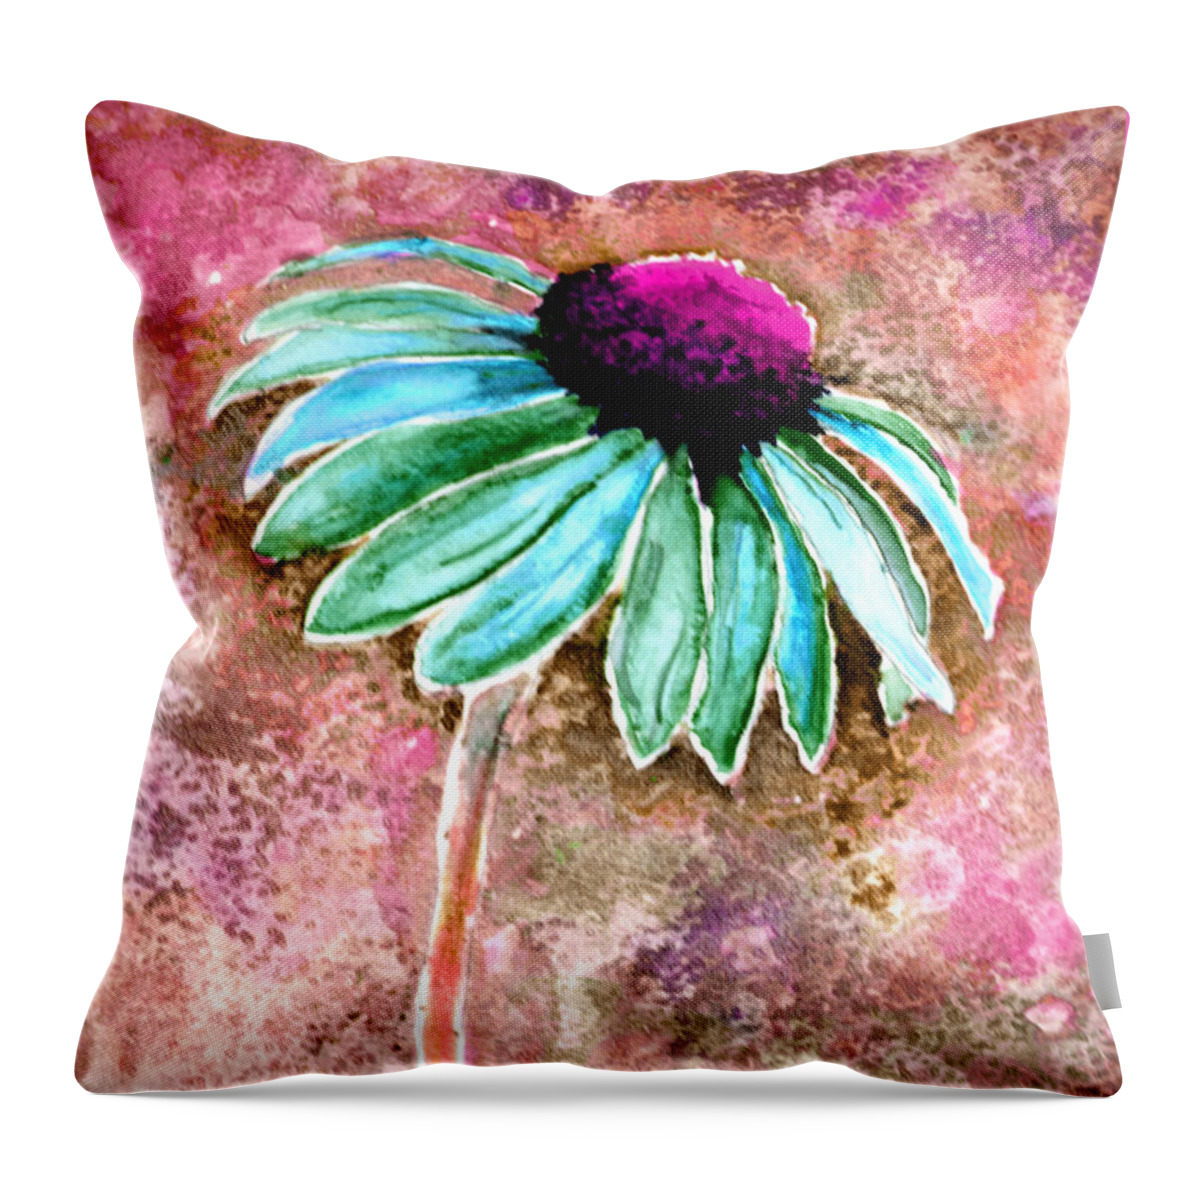 Abstract Throw Pillow featuring the painting Painting Cone Flower 8615D by Mas Art Studio